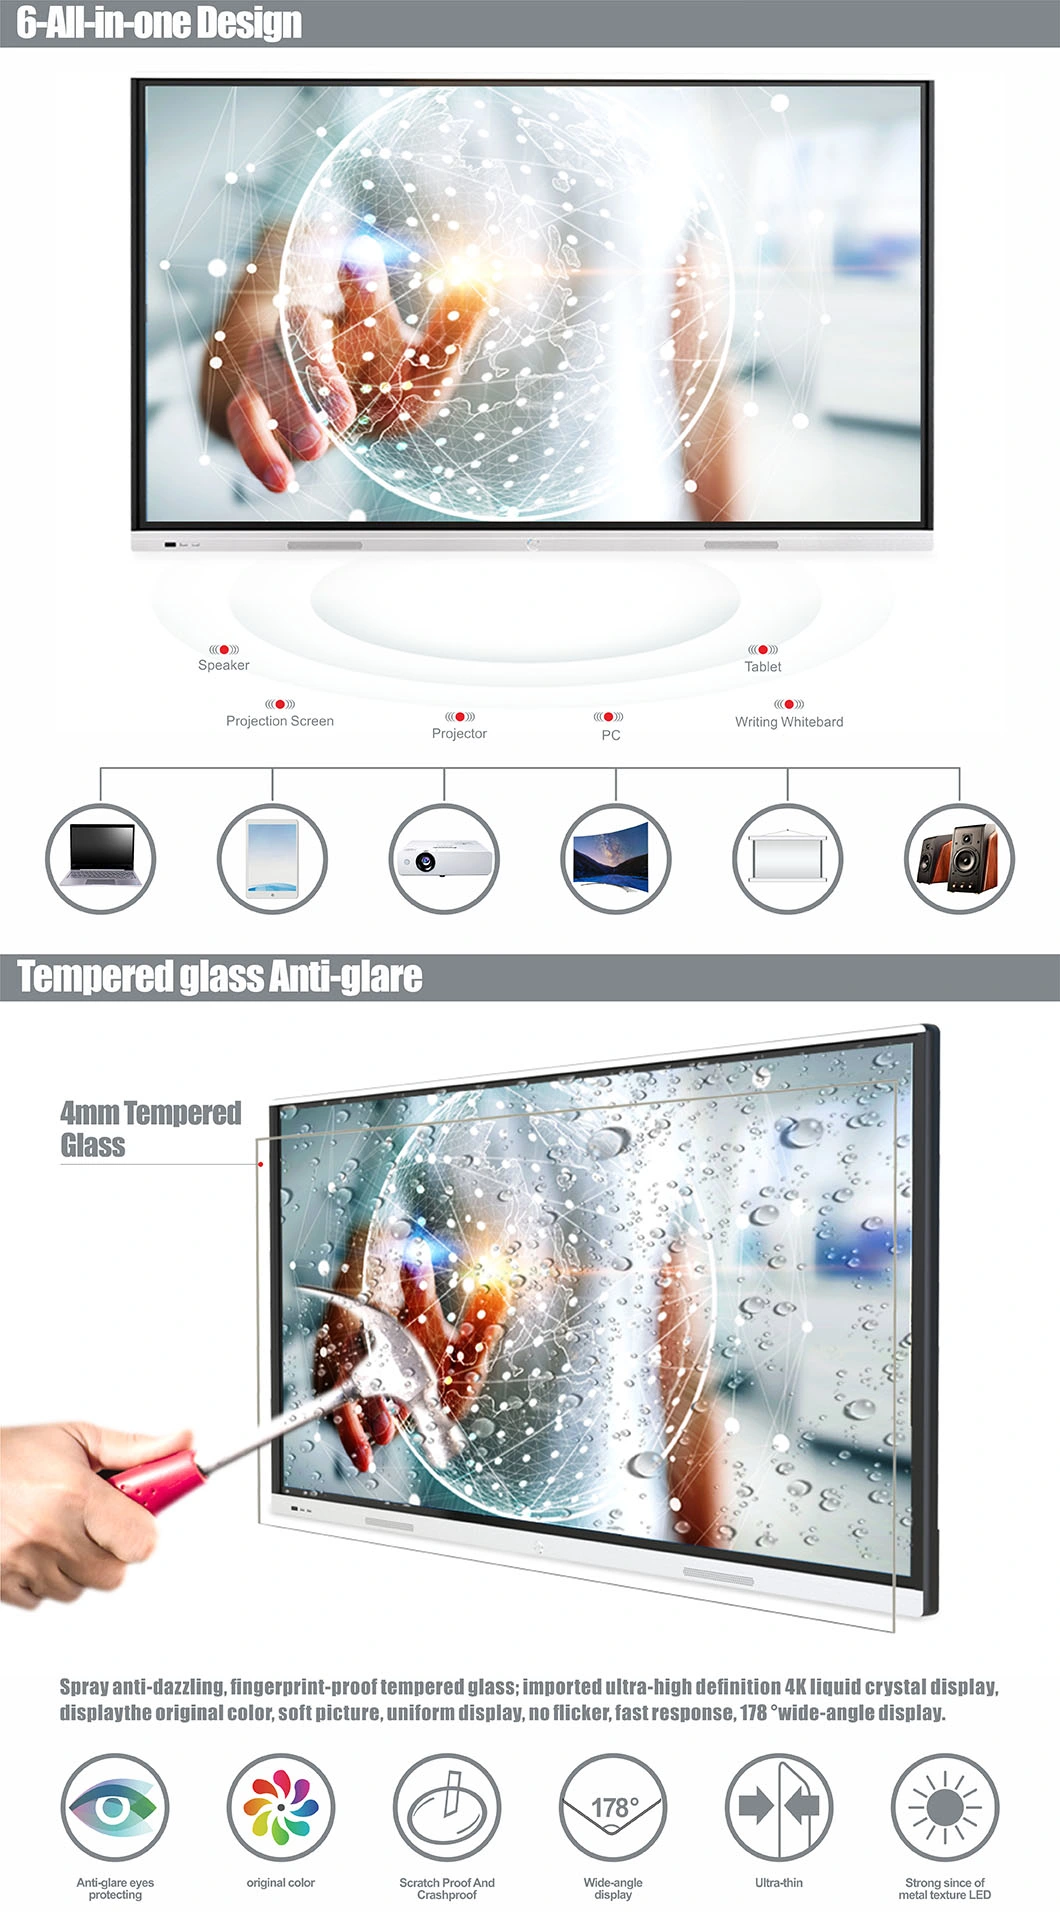 T6 Series Nesting 7 Inch Anti-Glare Toughened Glass Touch Screen Display Interactive Flat Panel